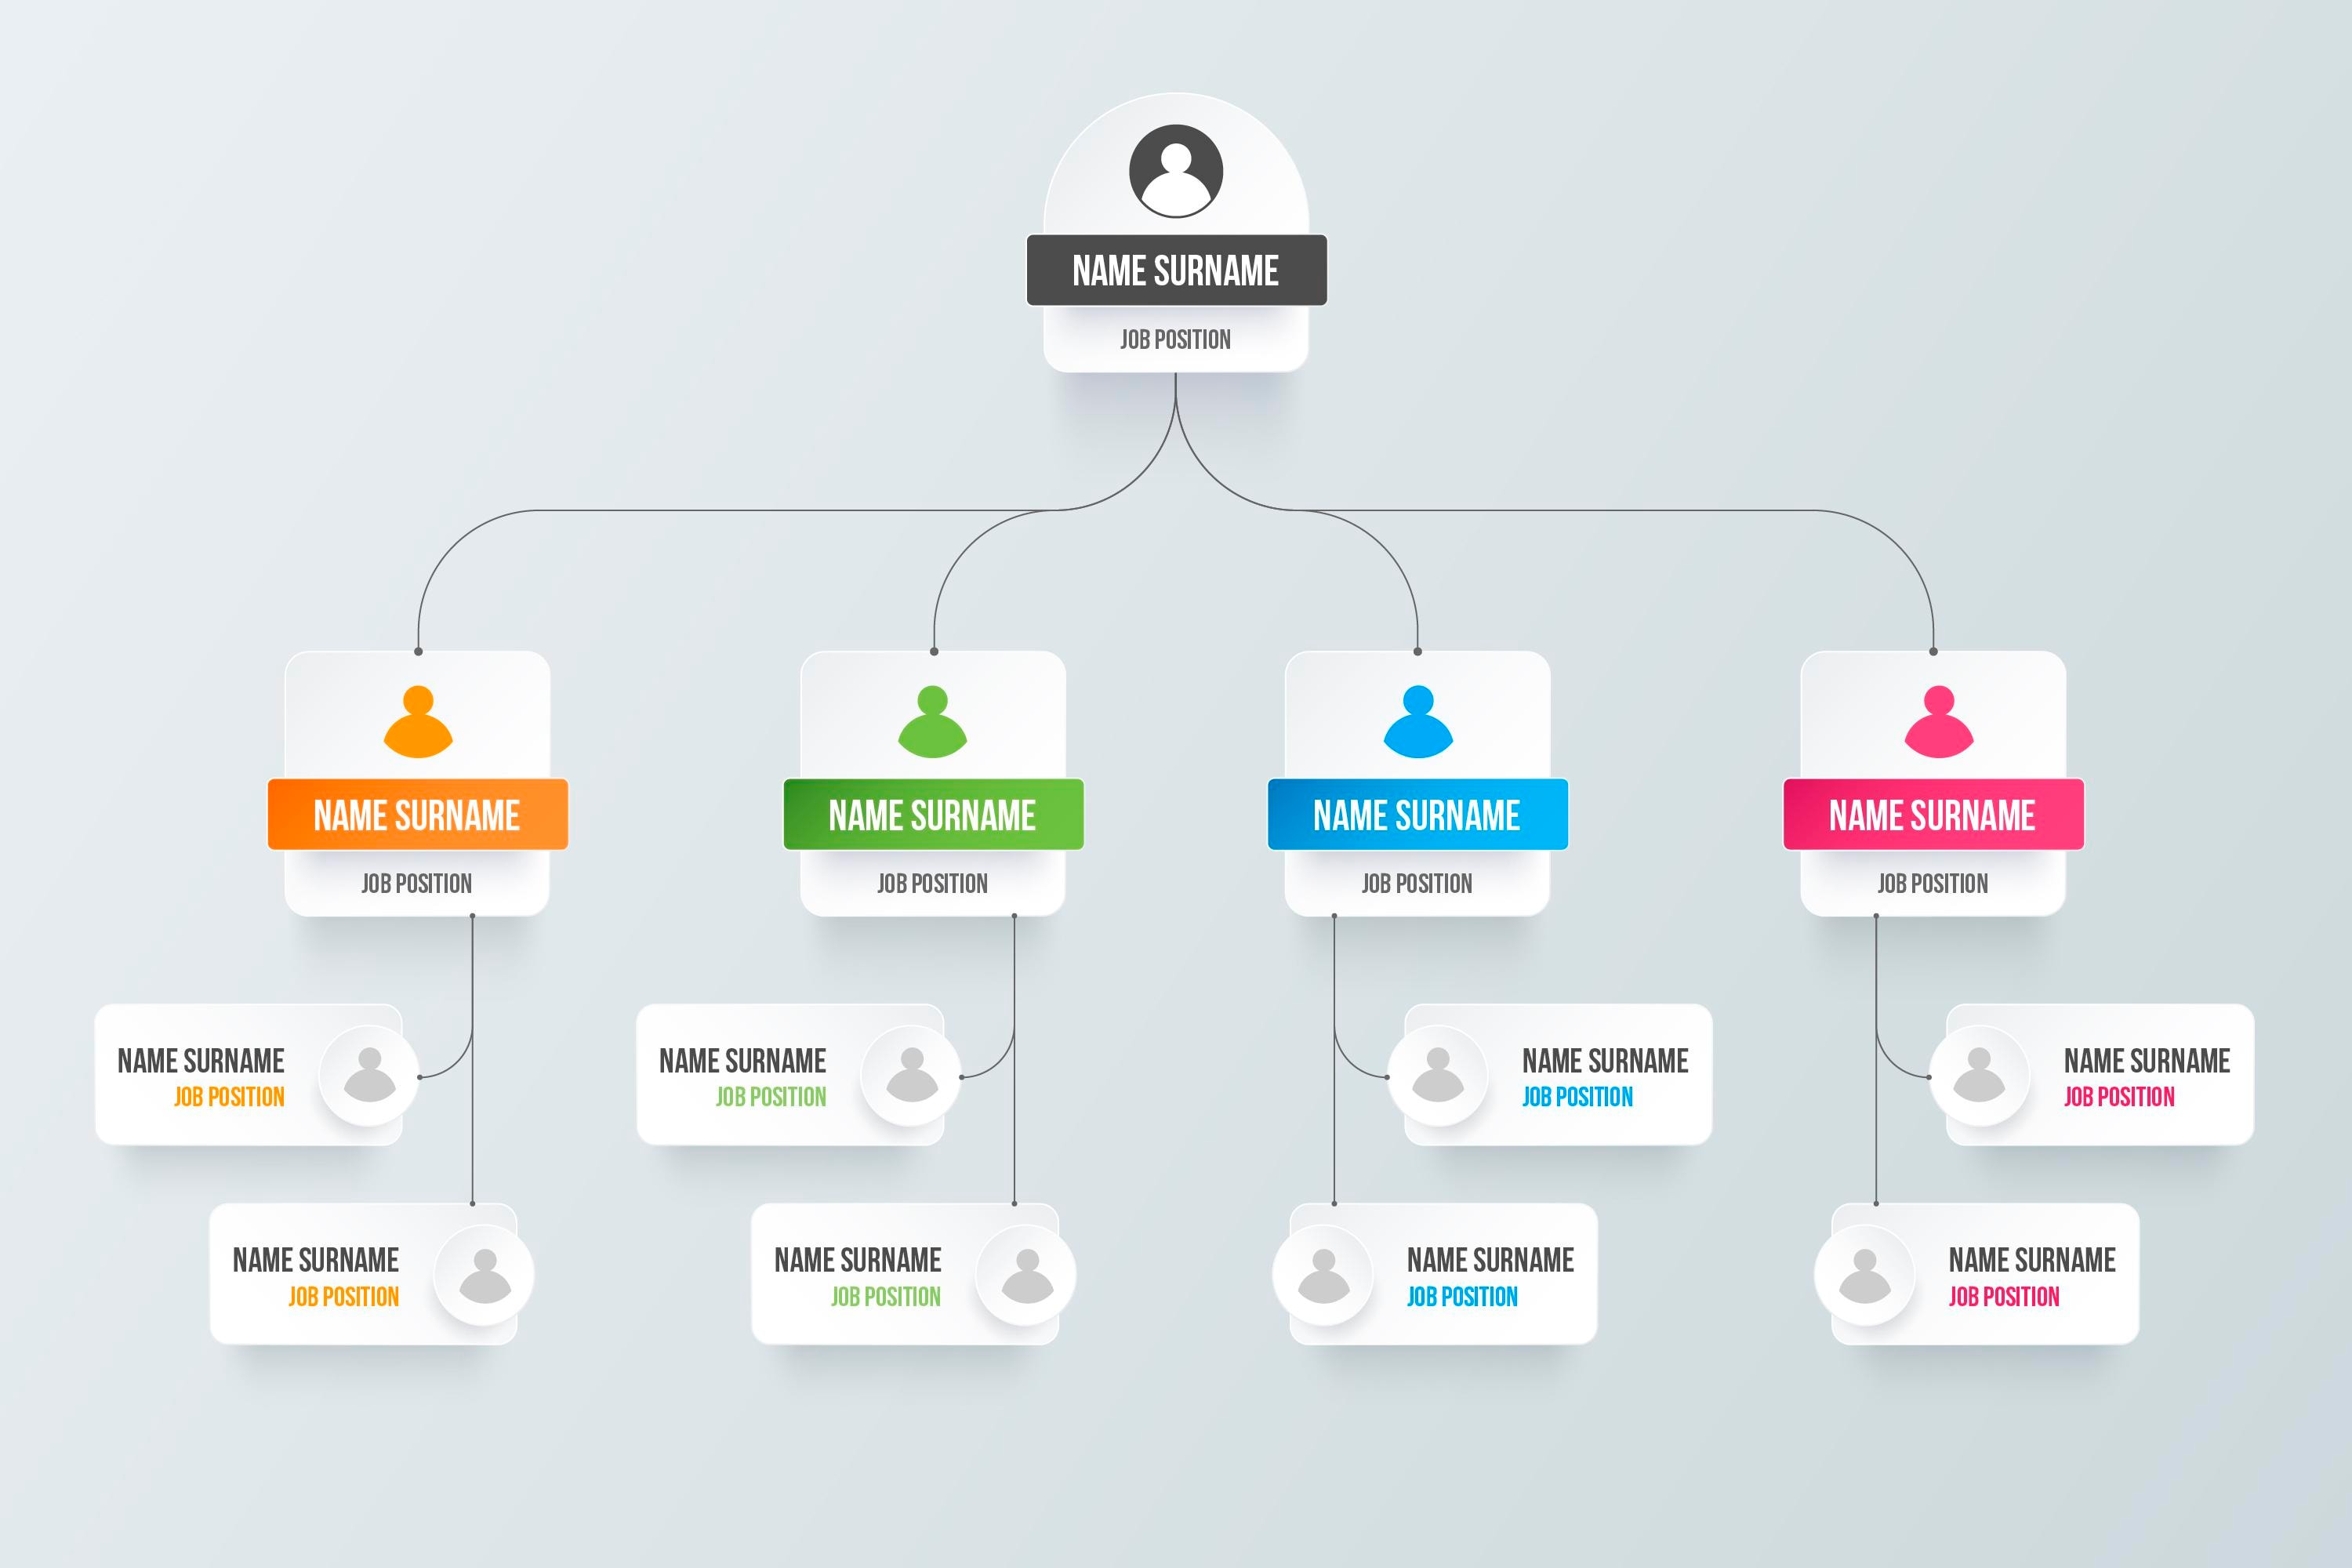 Organizational Chart Examples for Small Businesses - EdrawMind